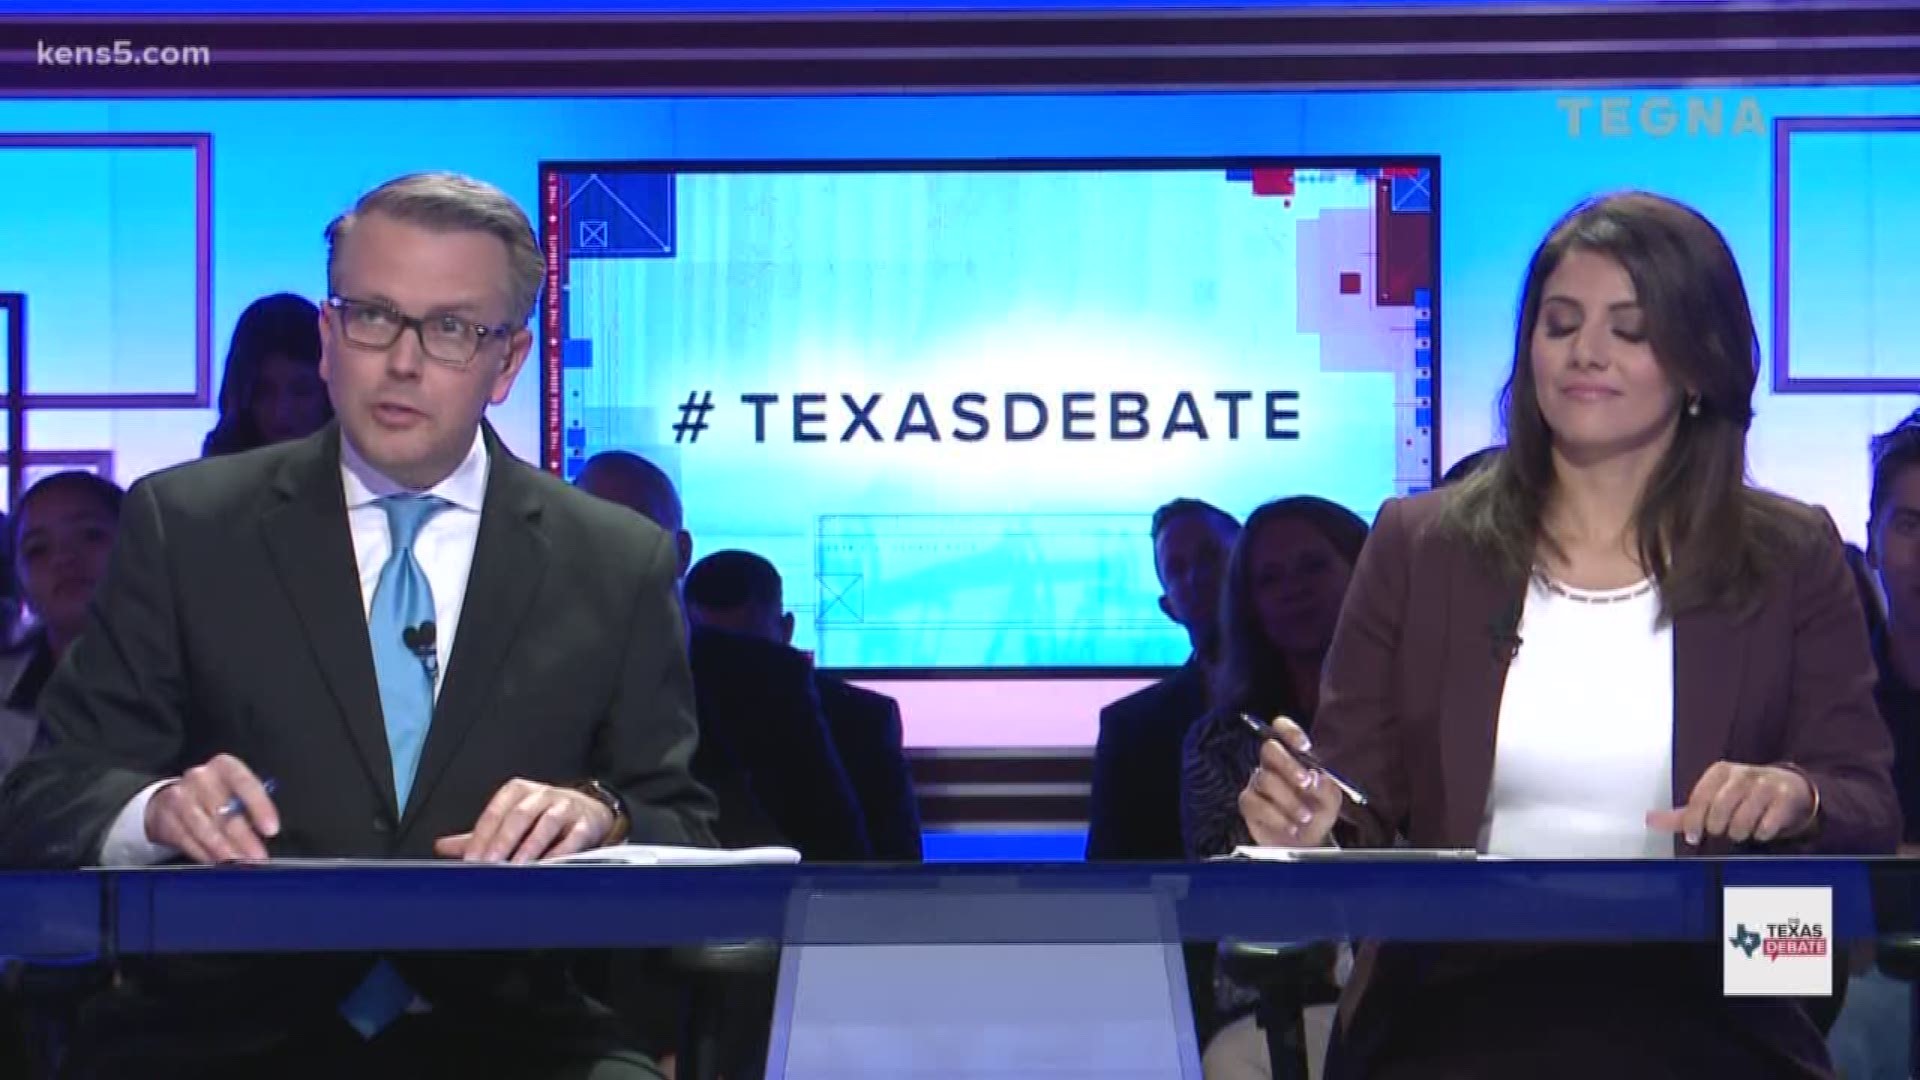 The candidates address Texas voters in their closing statements.